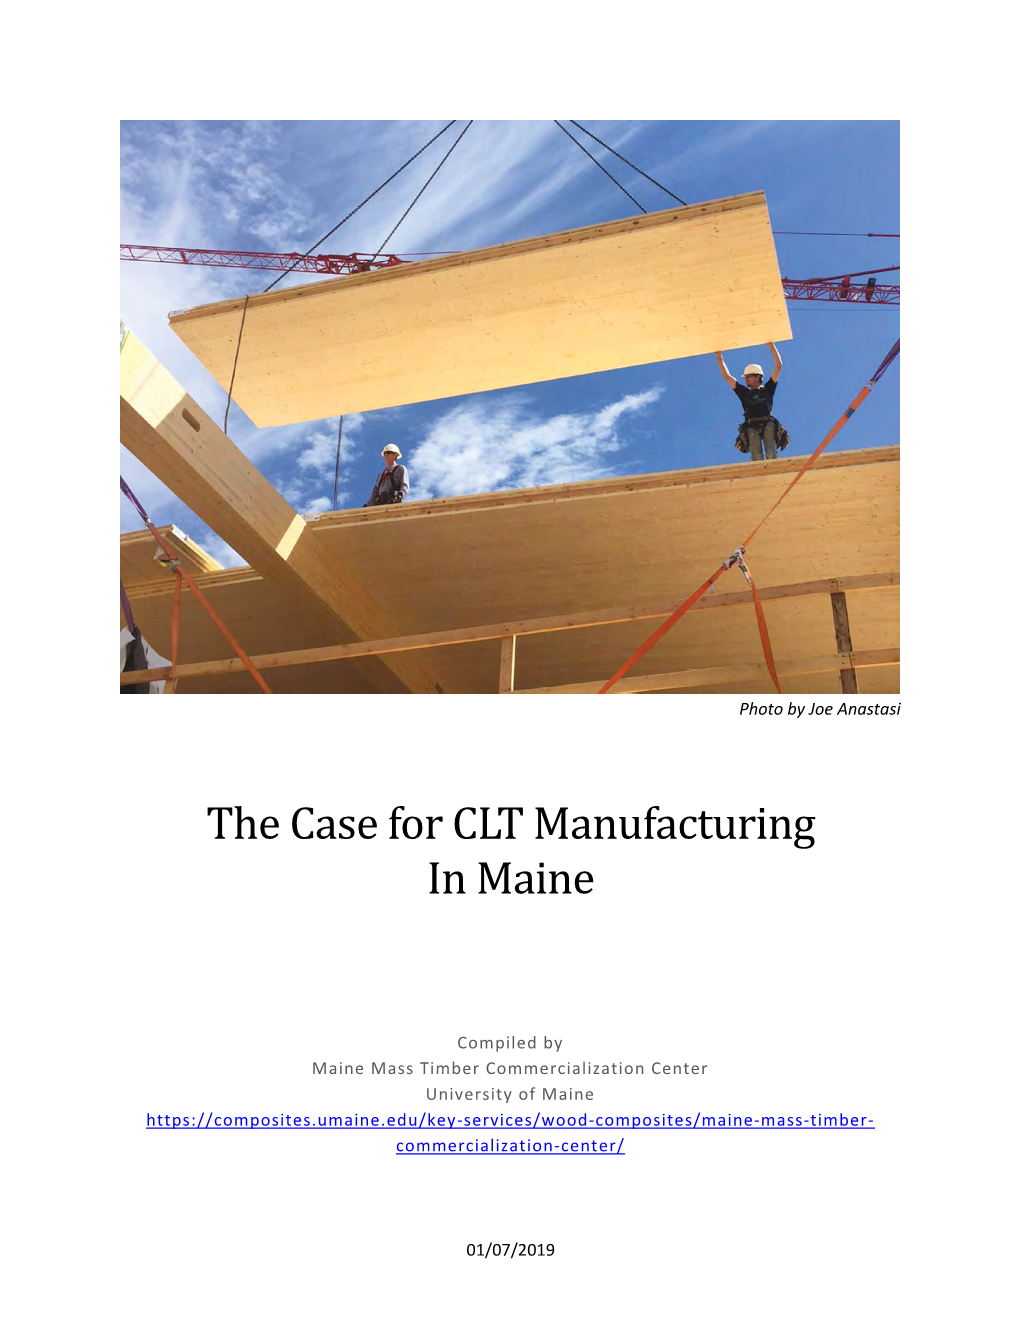 The Case for CLT Manufacturing in Maine